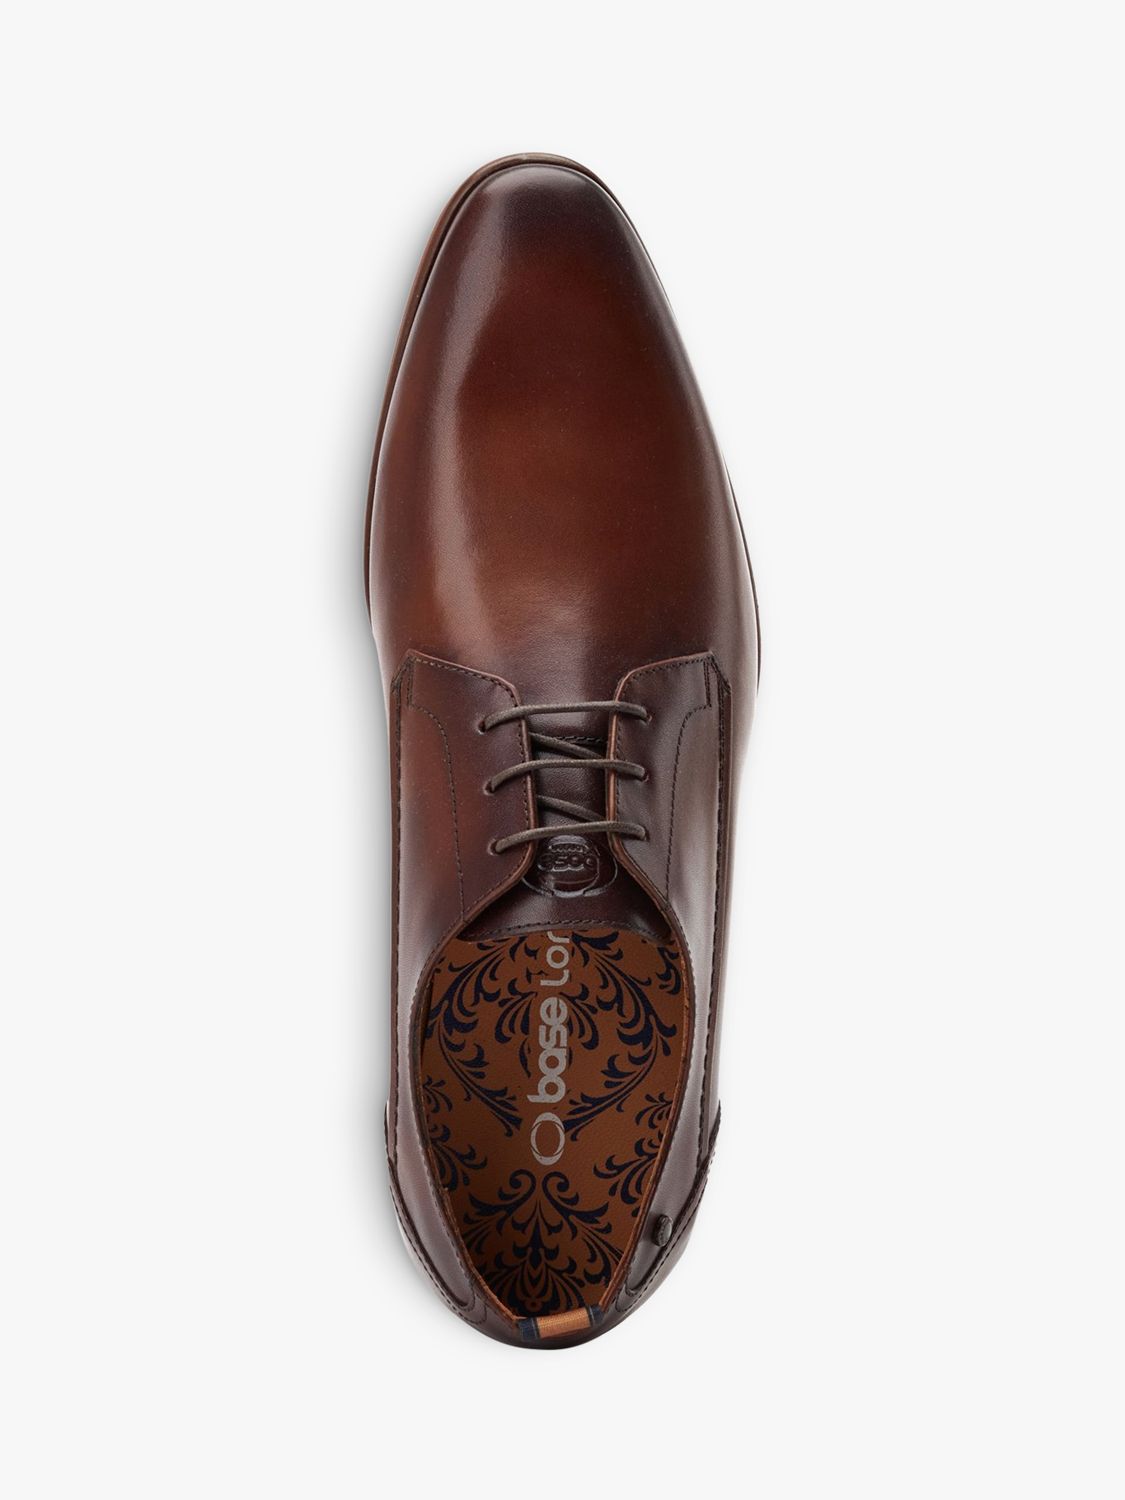 Base London Gambino Lace Up Derby, Brown, 9